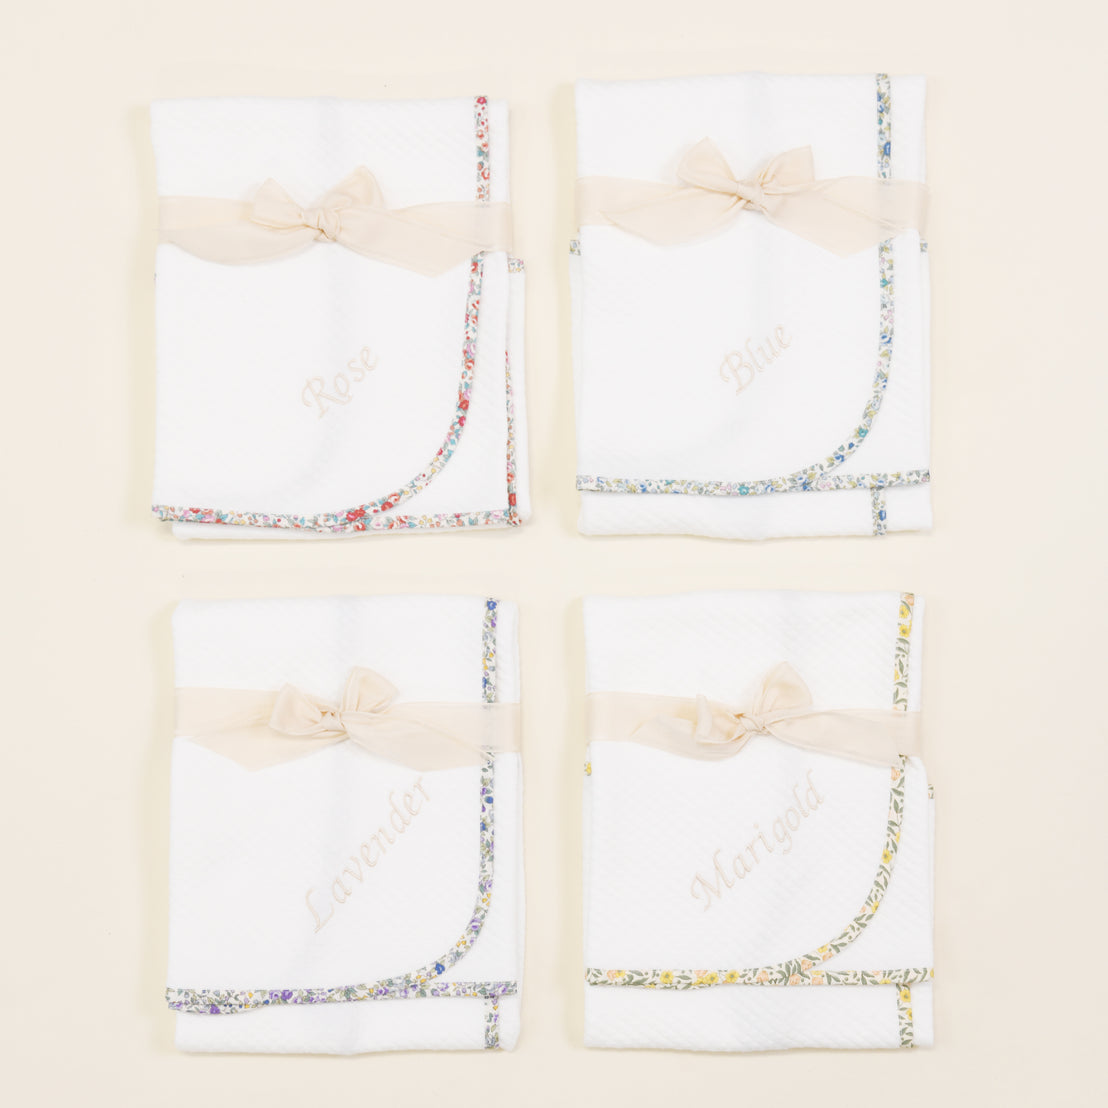 Four white Petite Fleur Personalized Blanket fabric swatches decorated with floral trim and satin bows, labeled rose, blue, lavender, and marigold, displayed on a light background.